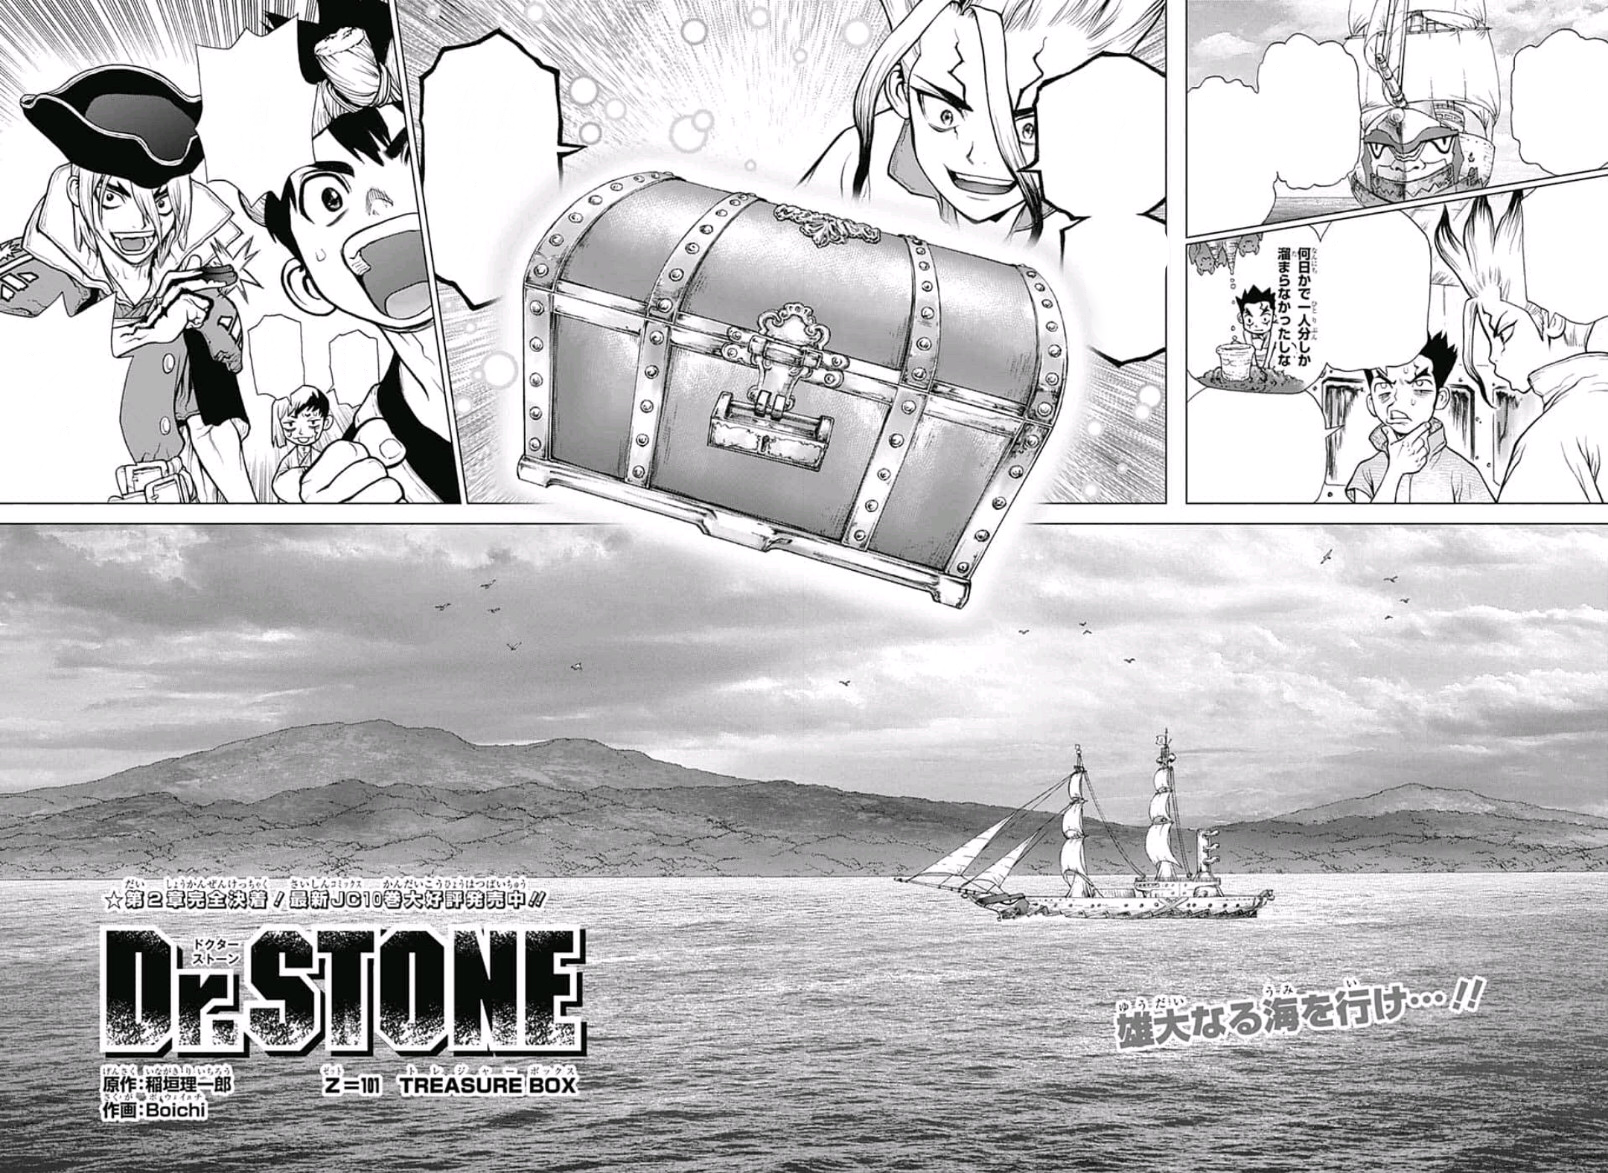 Dr. Stone: New World Episode 13 Preview Images Revealed - Anime Corner